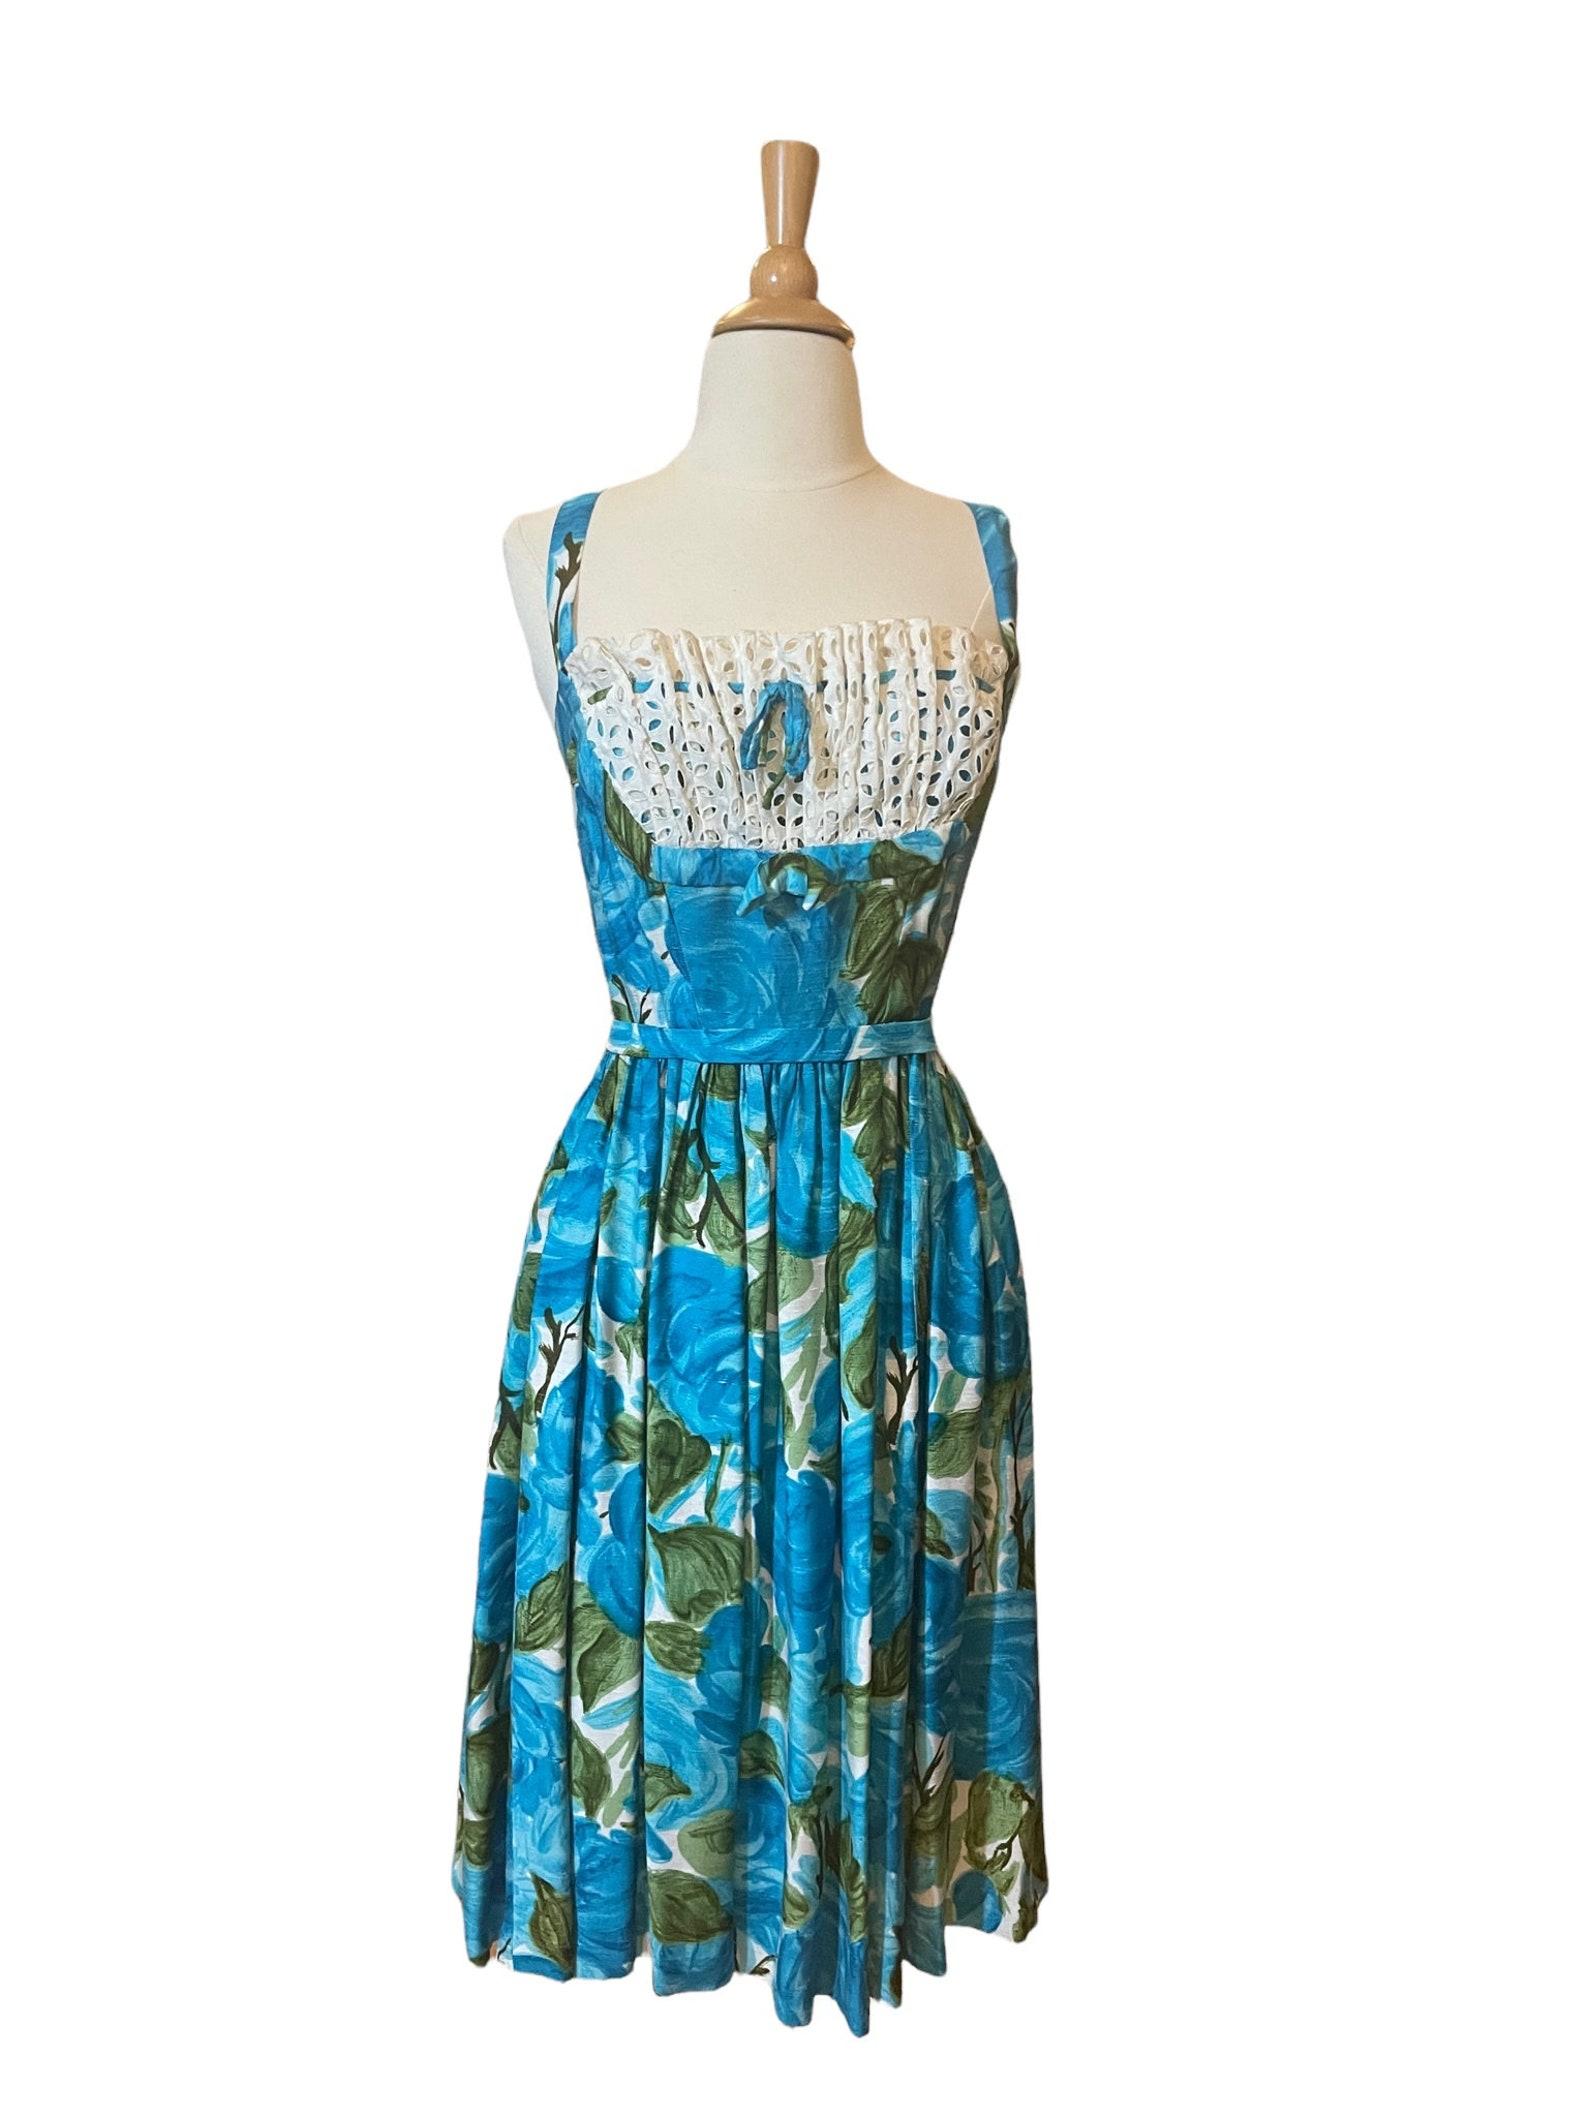 Blue and Green Watercolor Floral Sun Dress, Circa 1950s For Sale 6